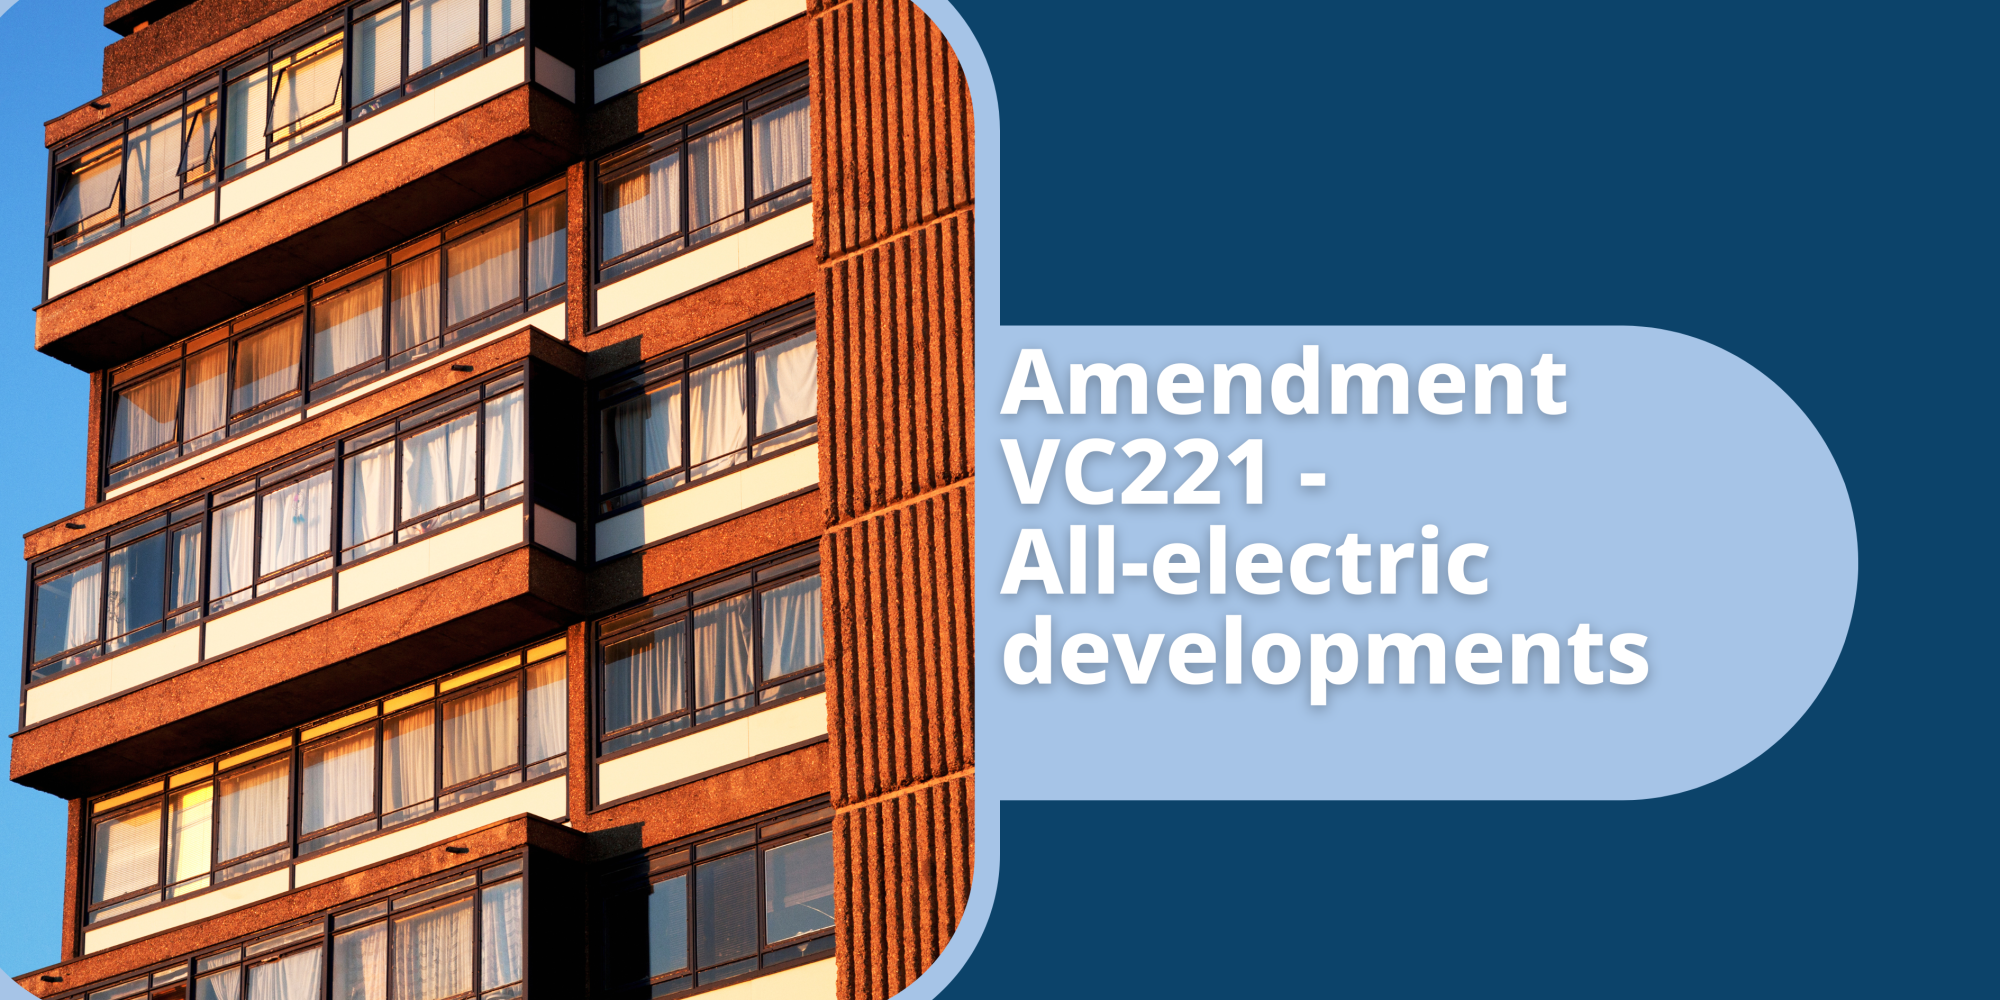 Planning Schemes amended to favour all-electric development